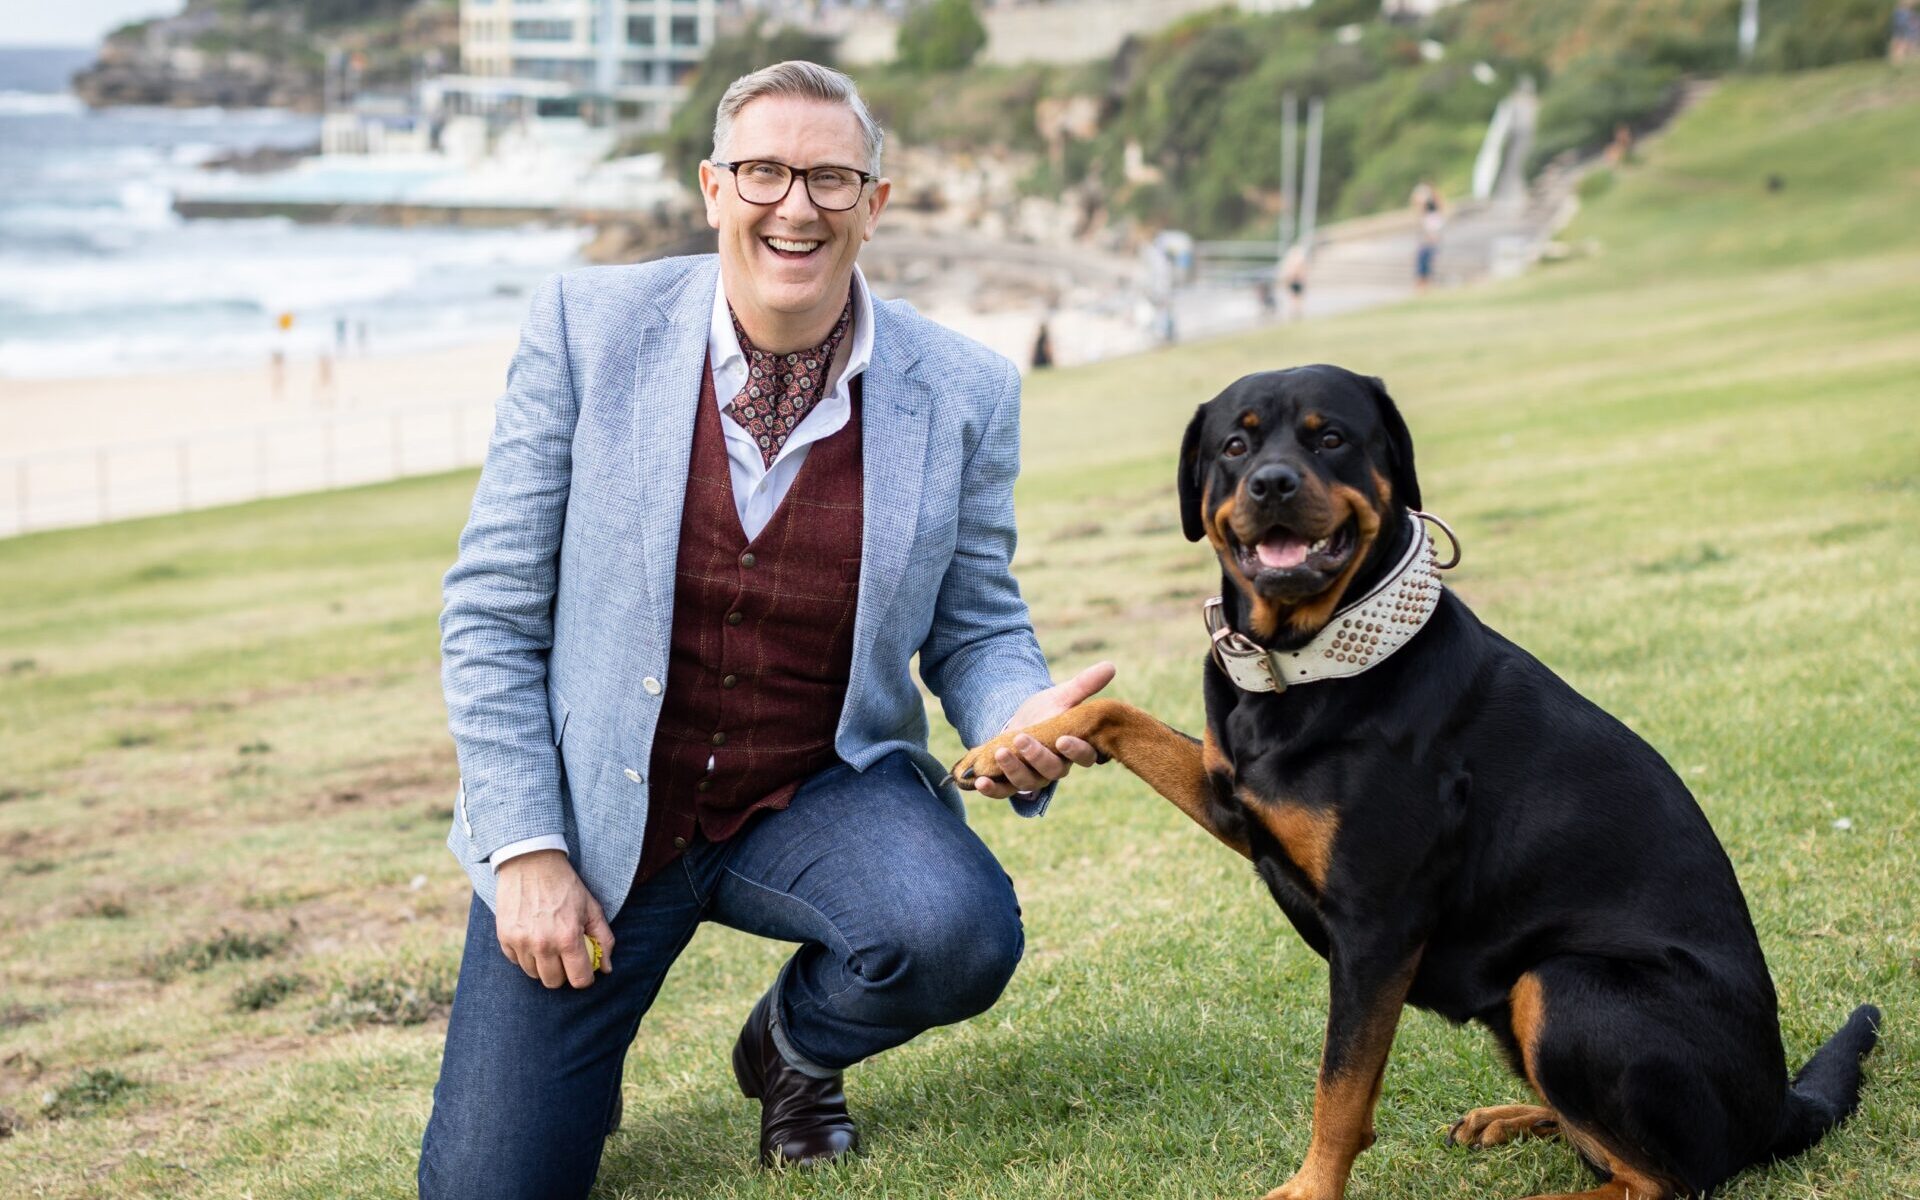 Dogs Behaving (Very) Badly Australia commences filming